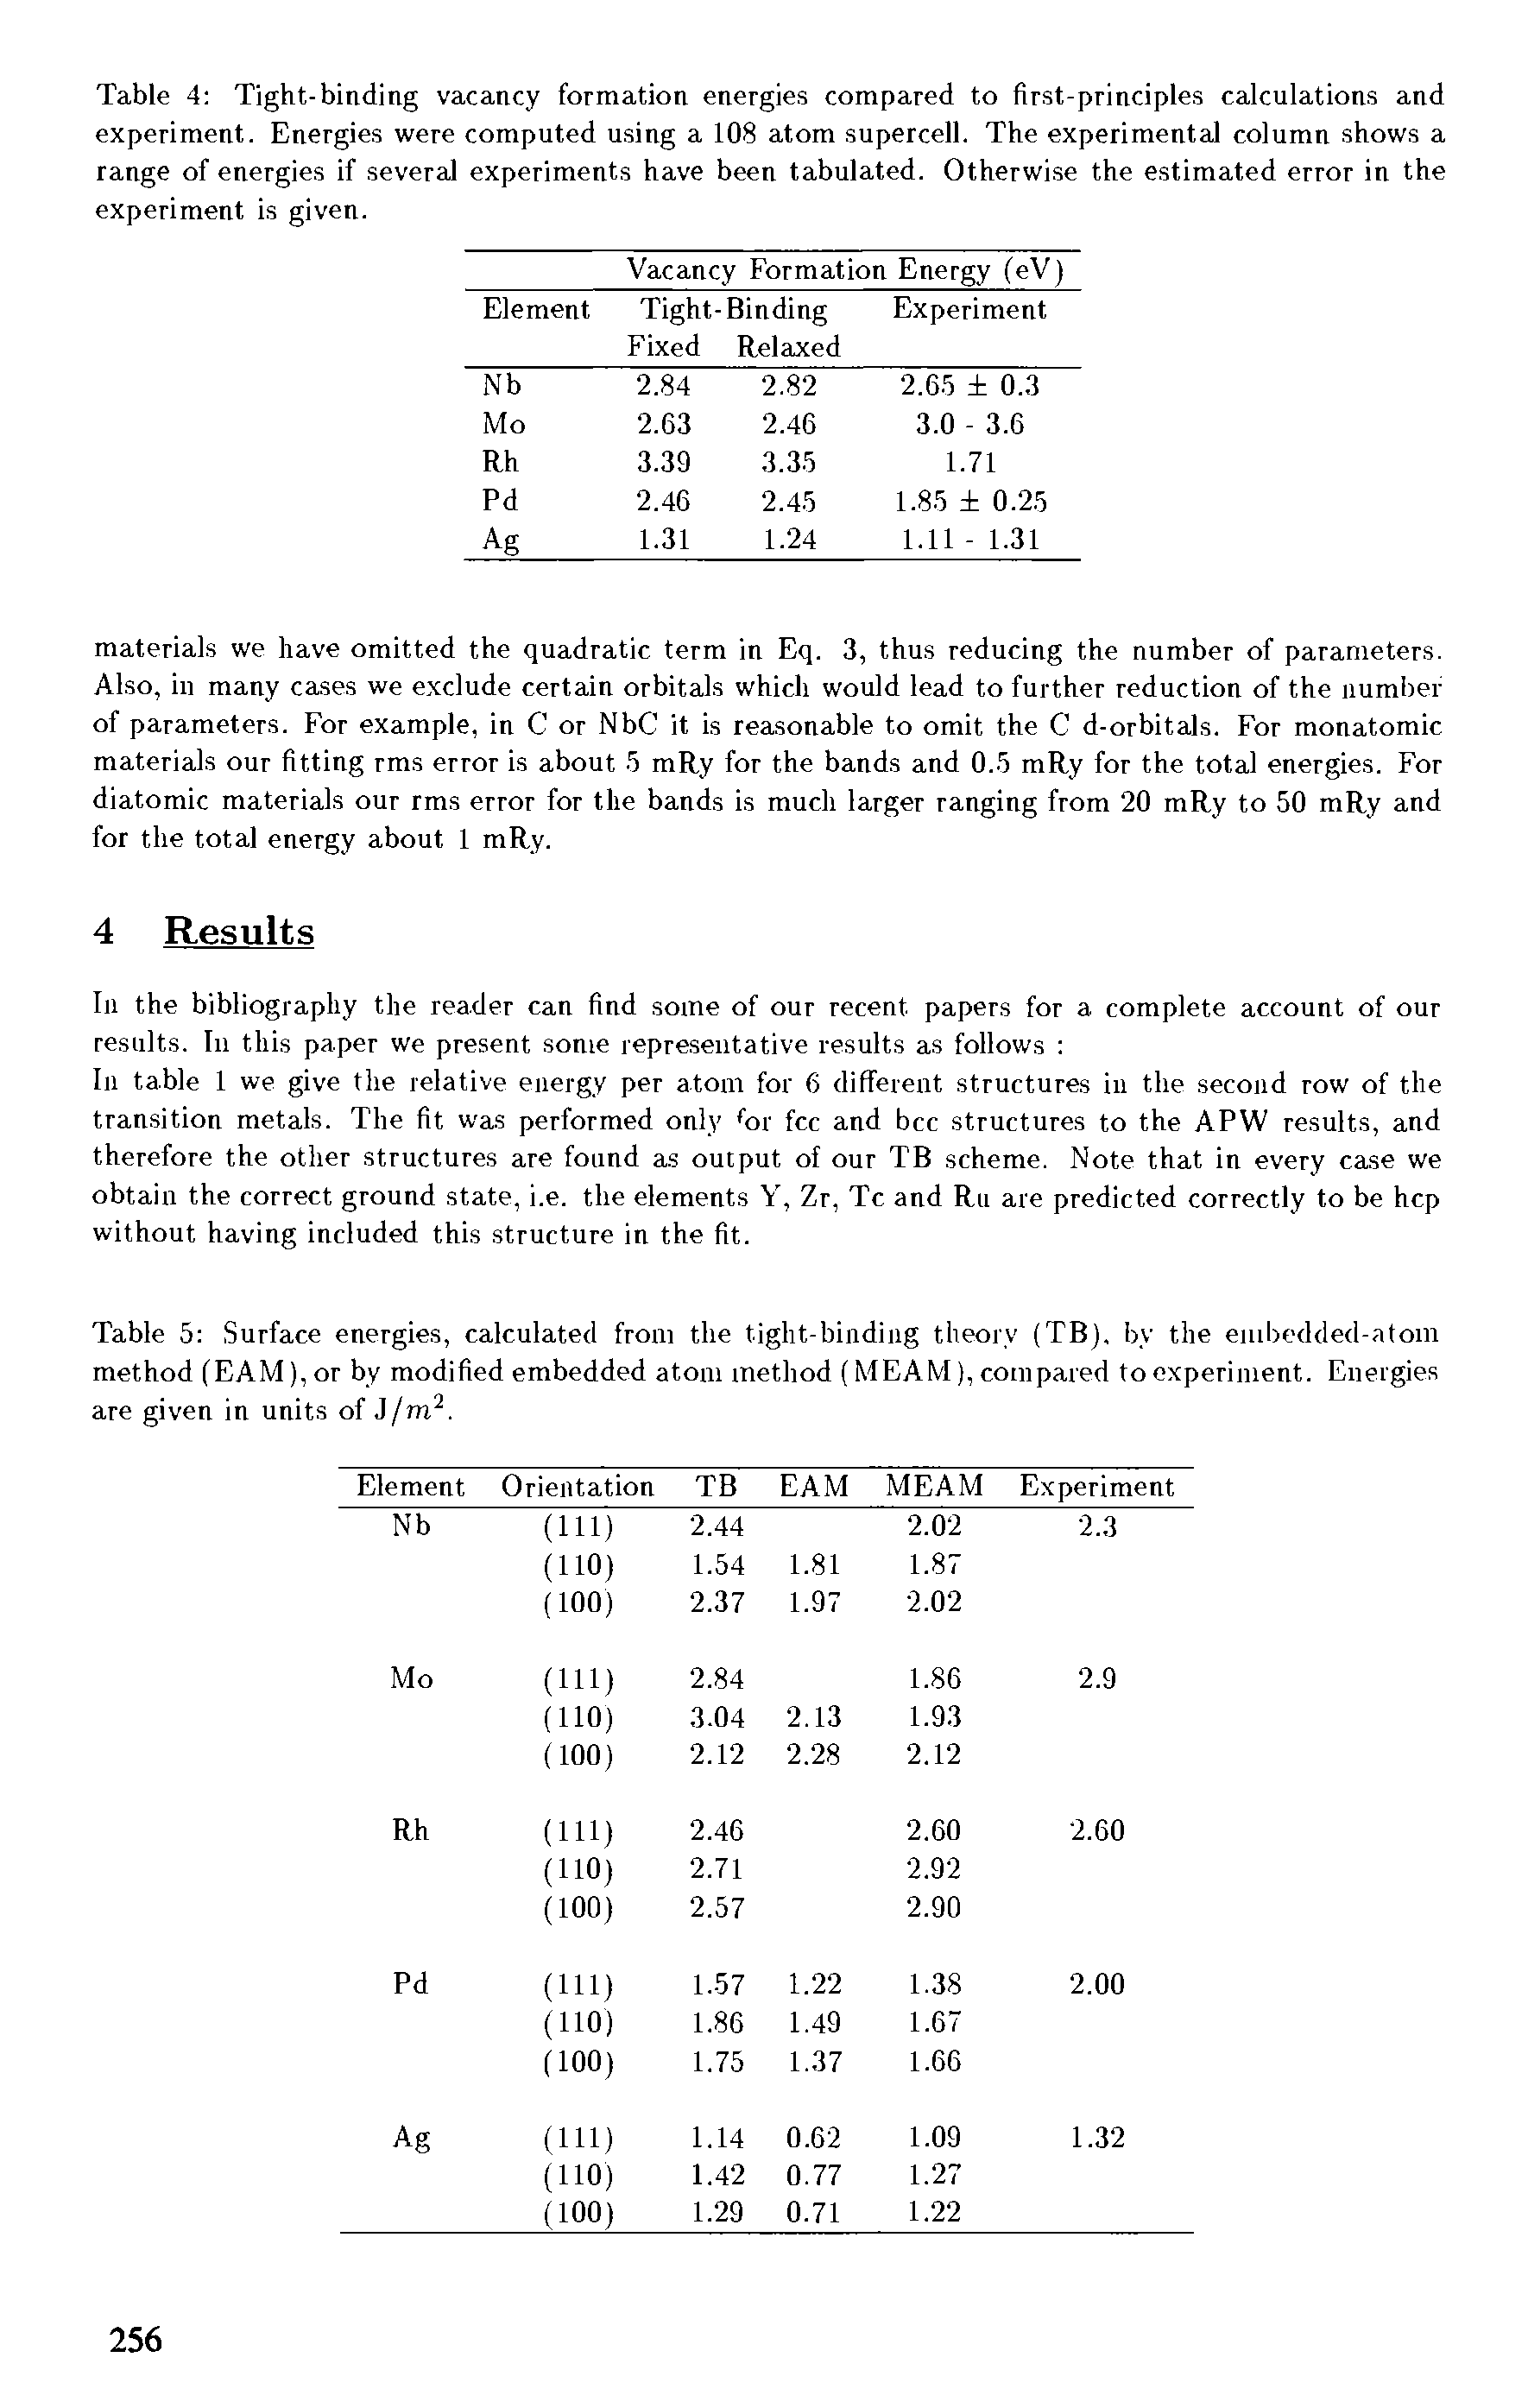 Table 5 Surface energies, calculated from the tight-binding theory (TB), by the embedded-atom method (EAM), or by modified embedded atom method (MEAM), compared to experiment. Energies are given in units of ijm .